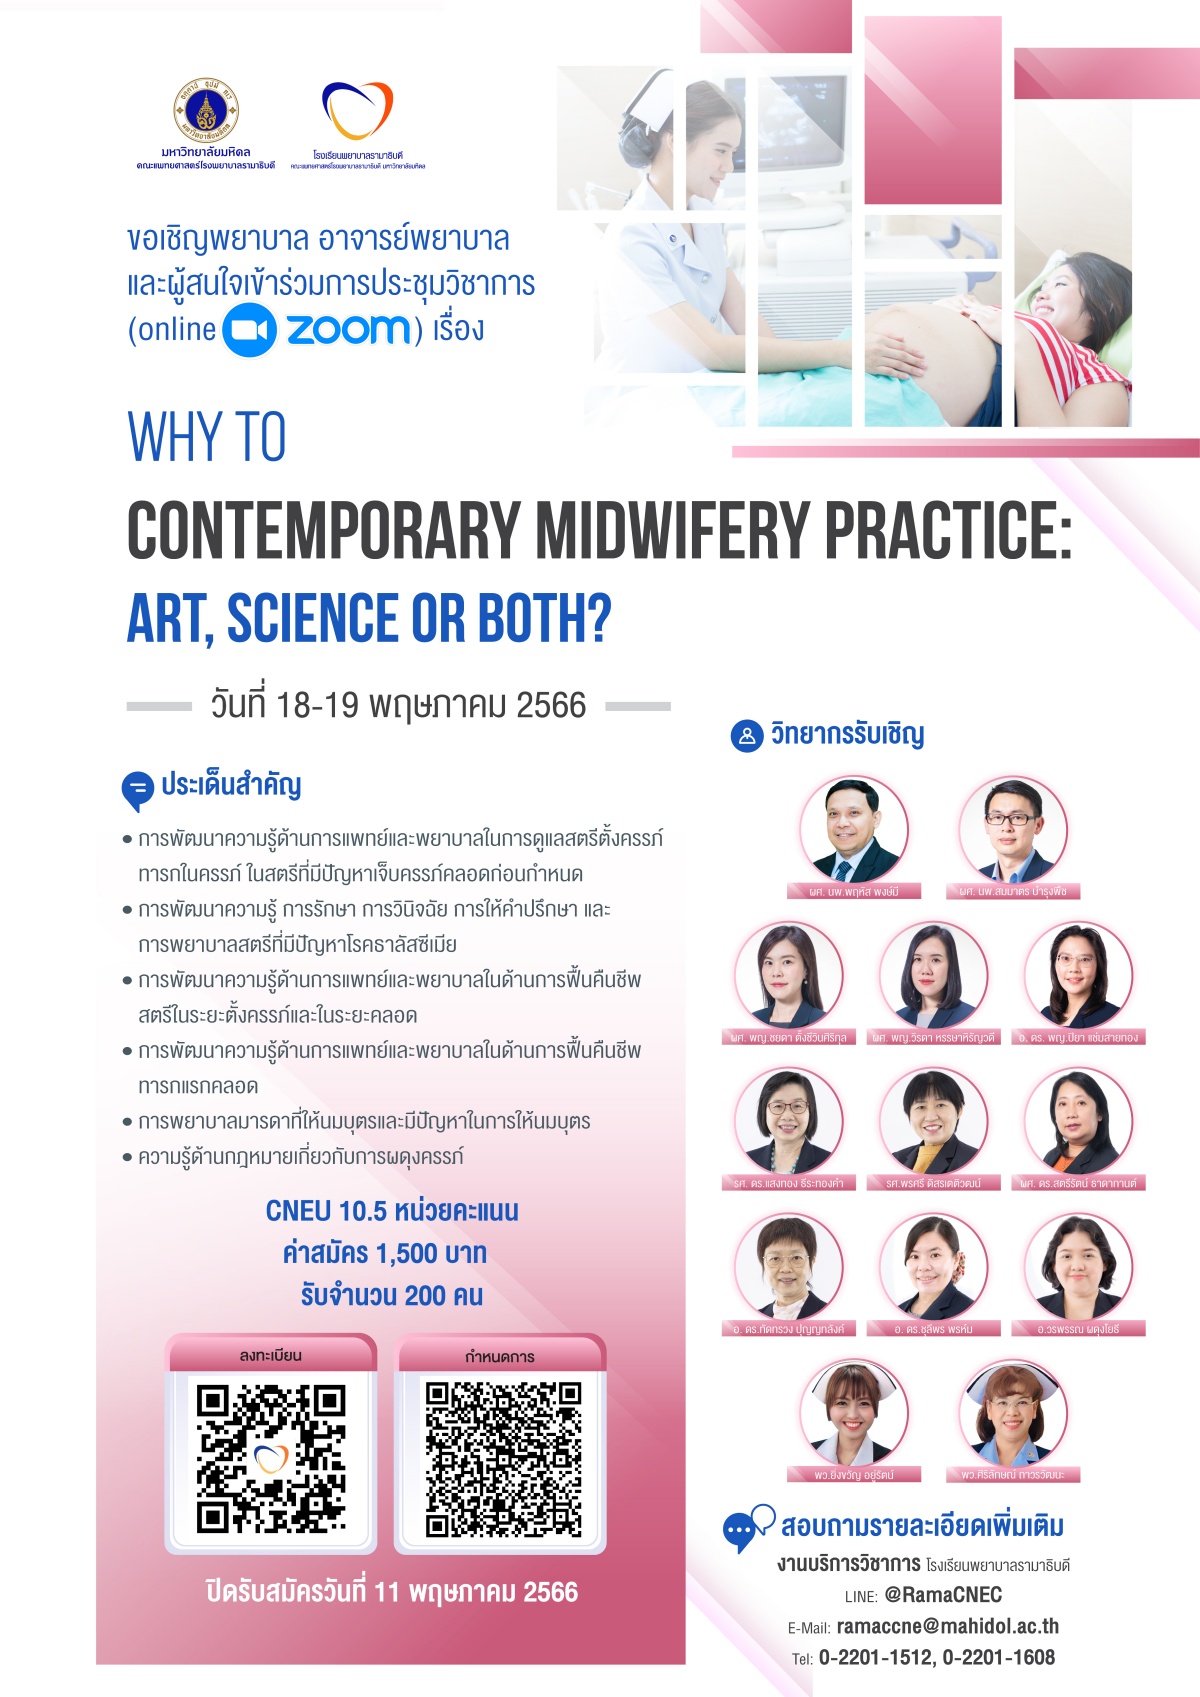 WHY TO CONTEMPORARY MIDWIFERY PRACTICE: ART, SCIENCE OR BOTH?